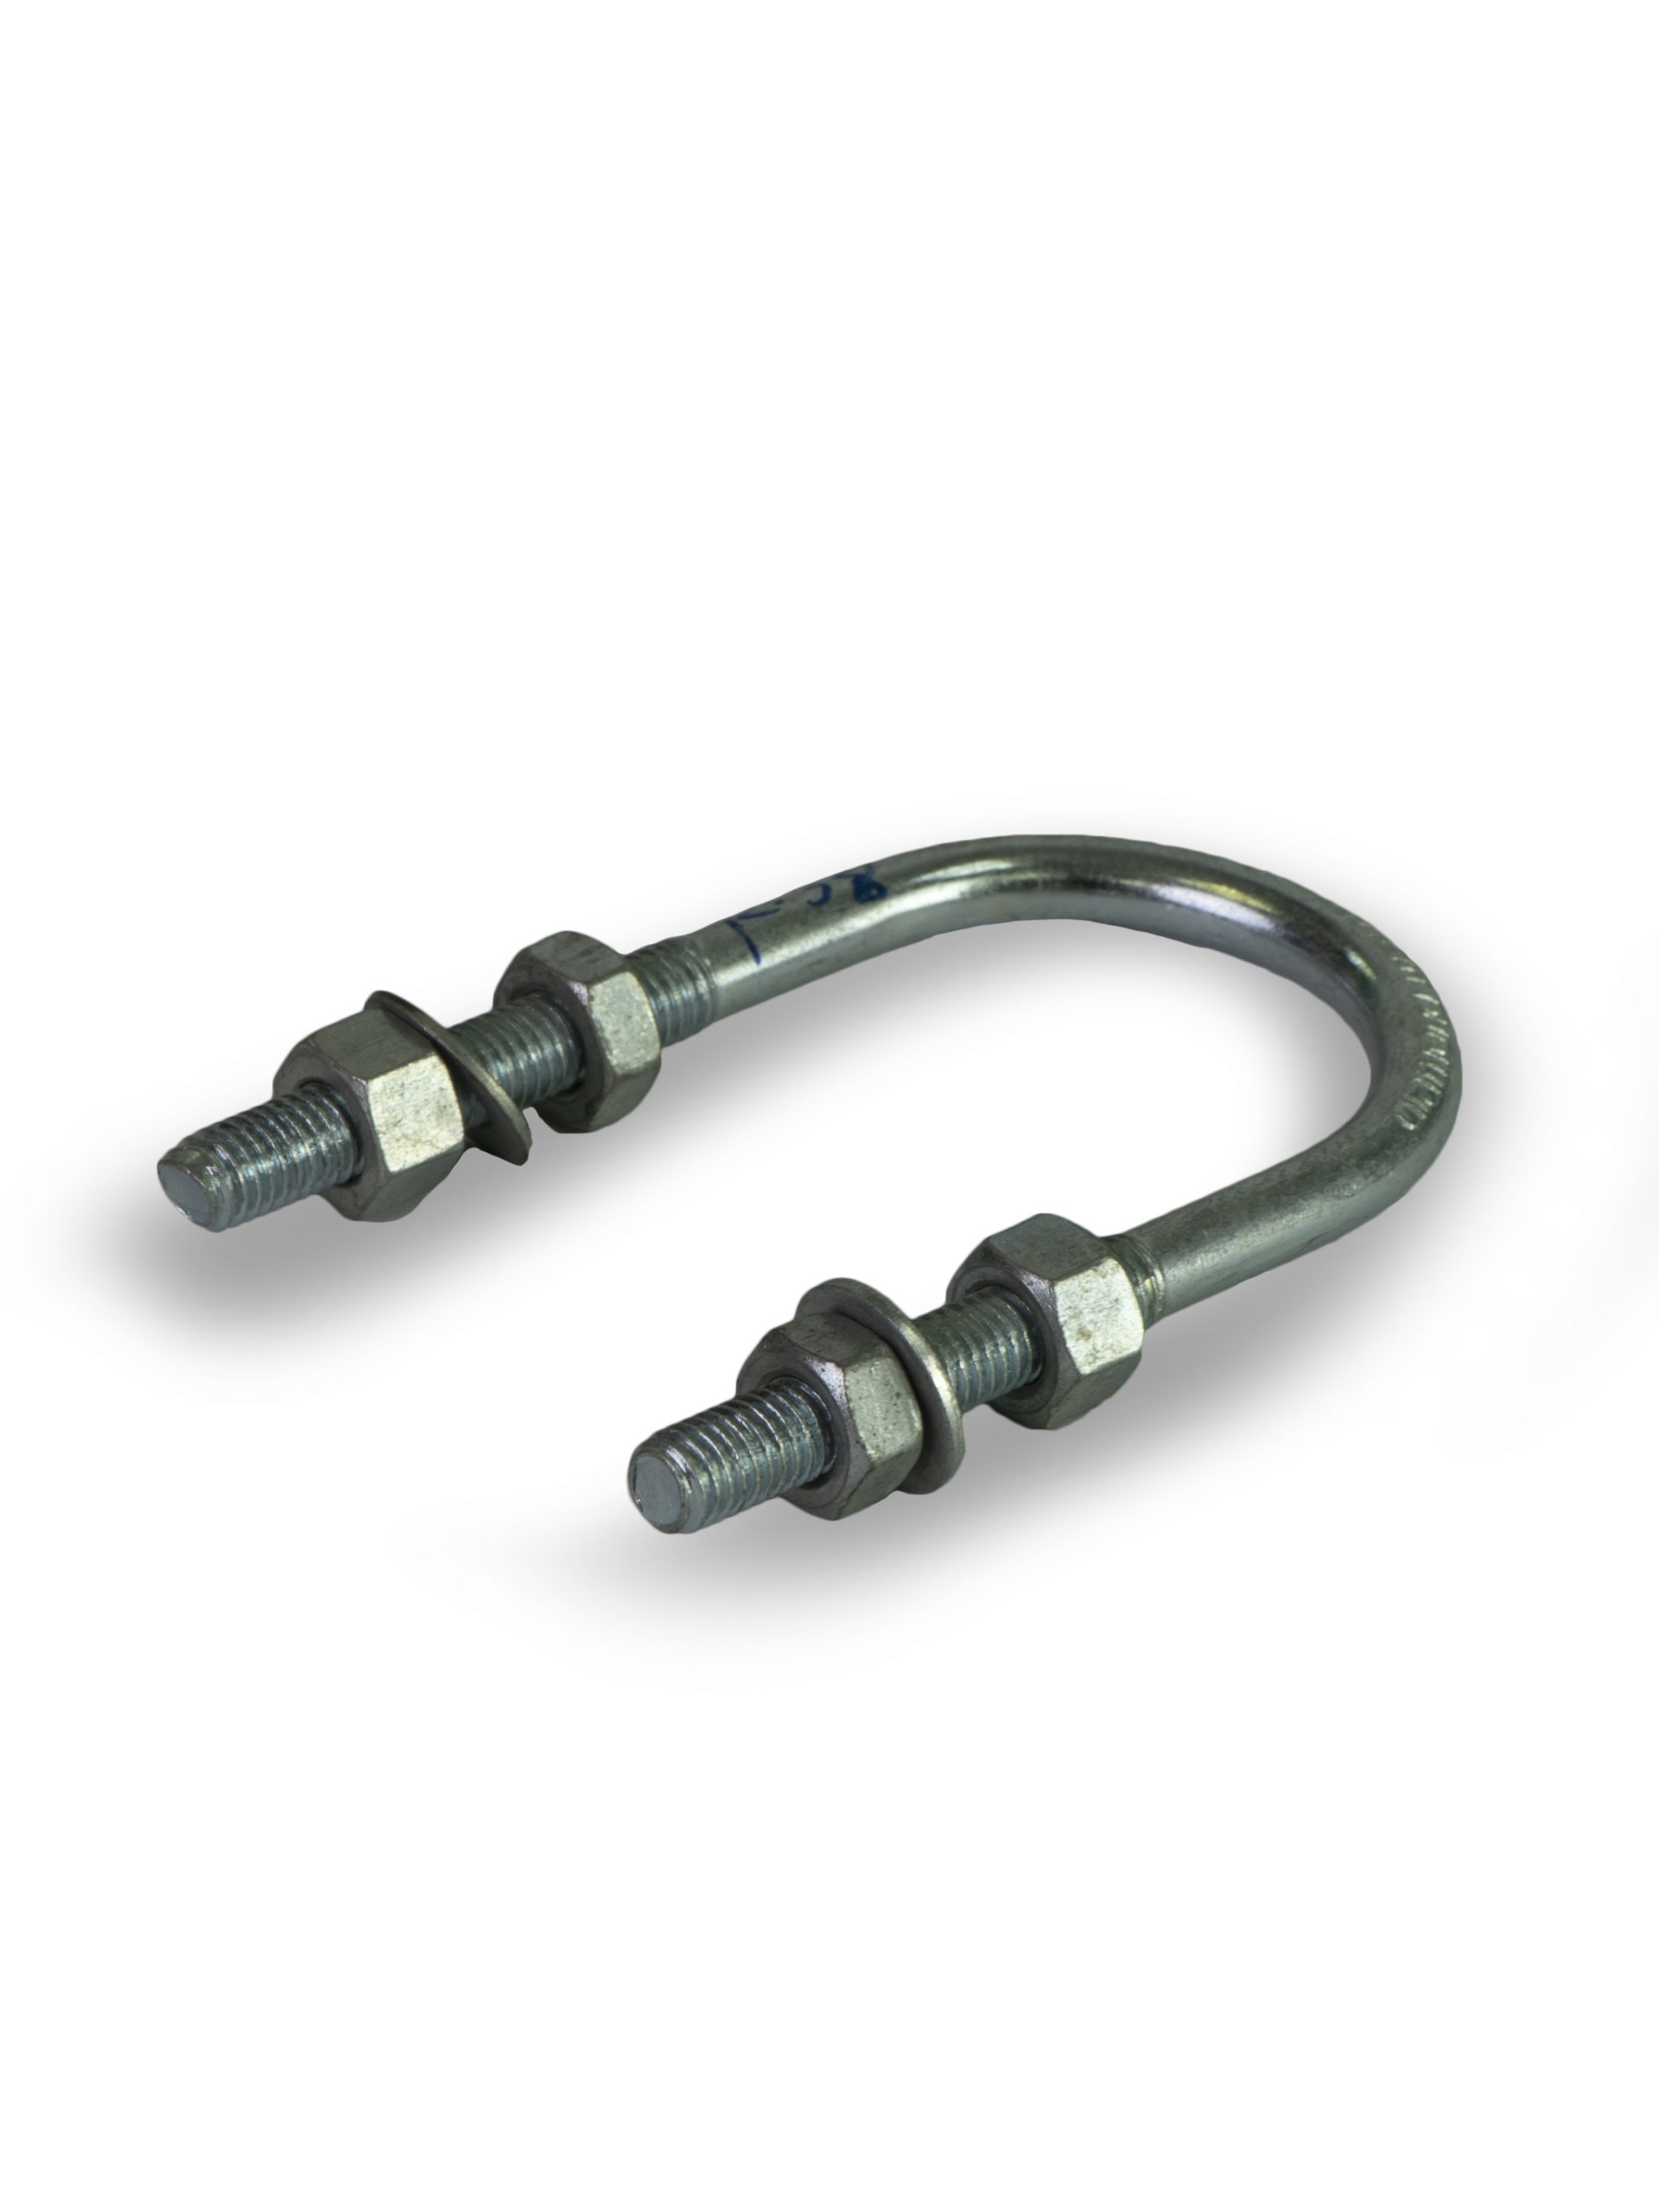 U CLAMP 1 1/4 Inches X 8 MM WITH NUTS AND WASHERS from Gas Equipment Company Llc Abu Dhabi, UNITED ARAB EMIRATES